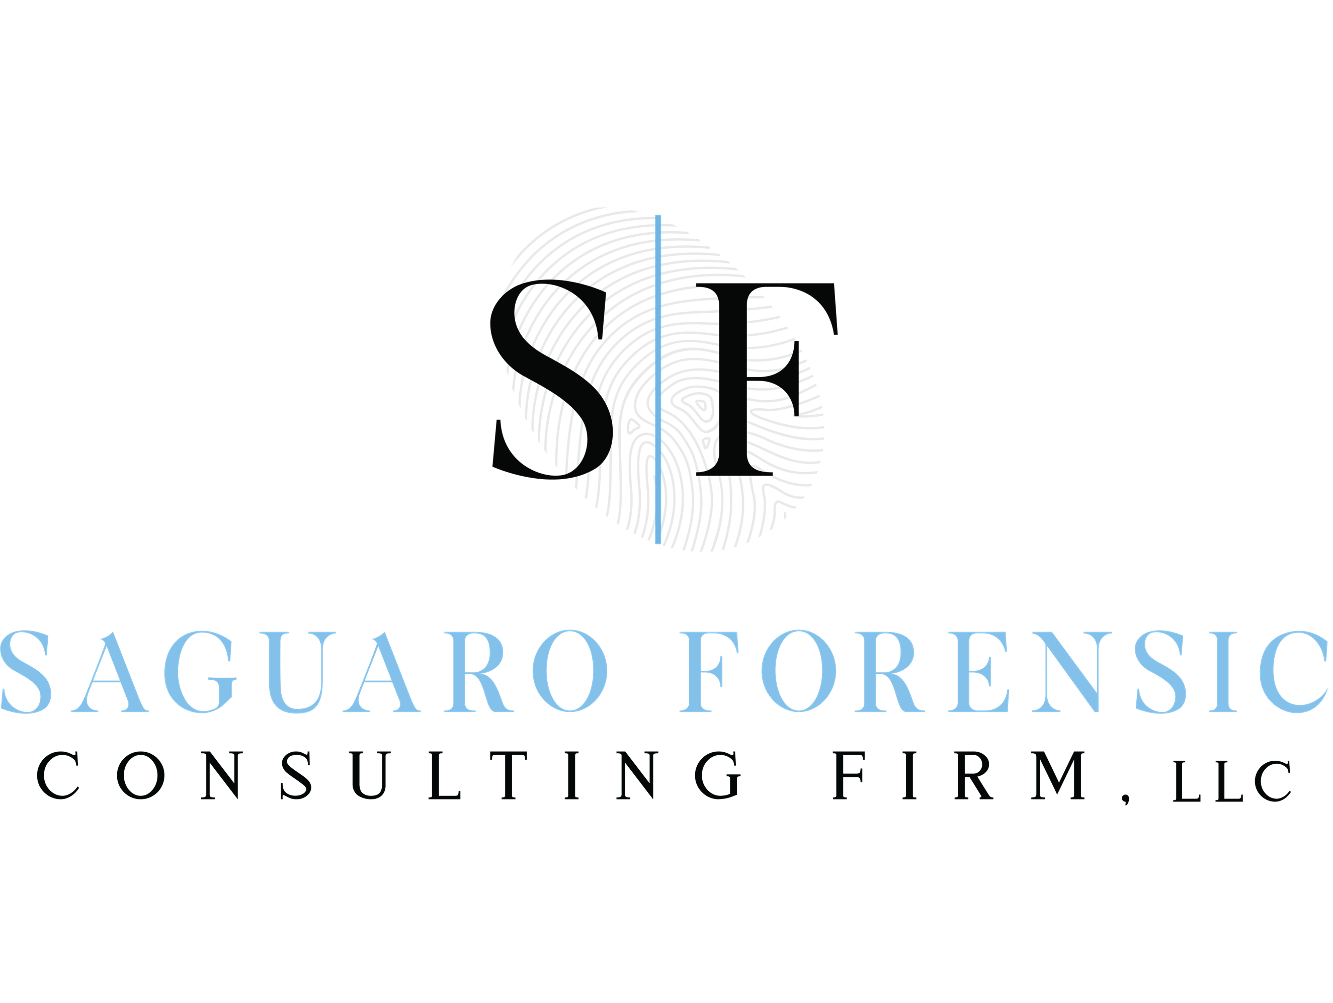 Saguaro Forensic Consulting Firm, LLC